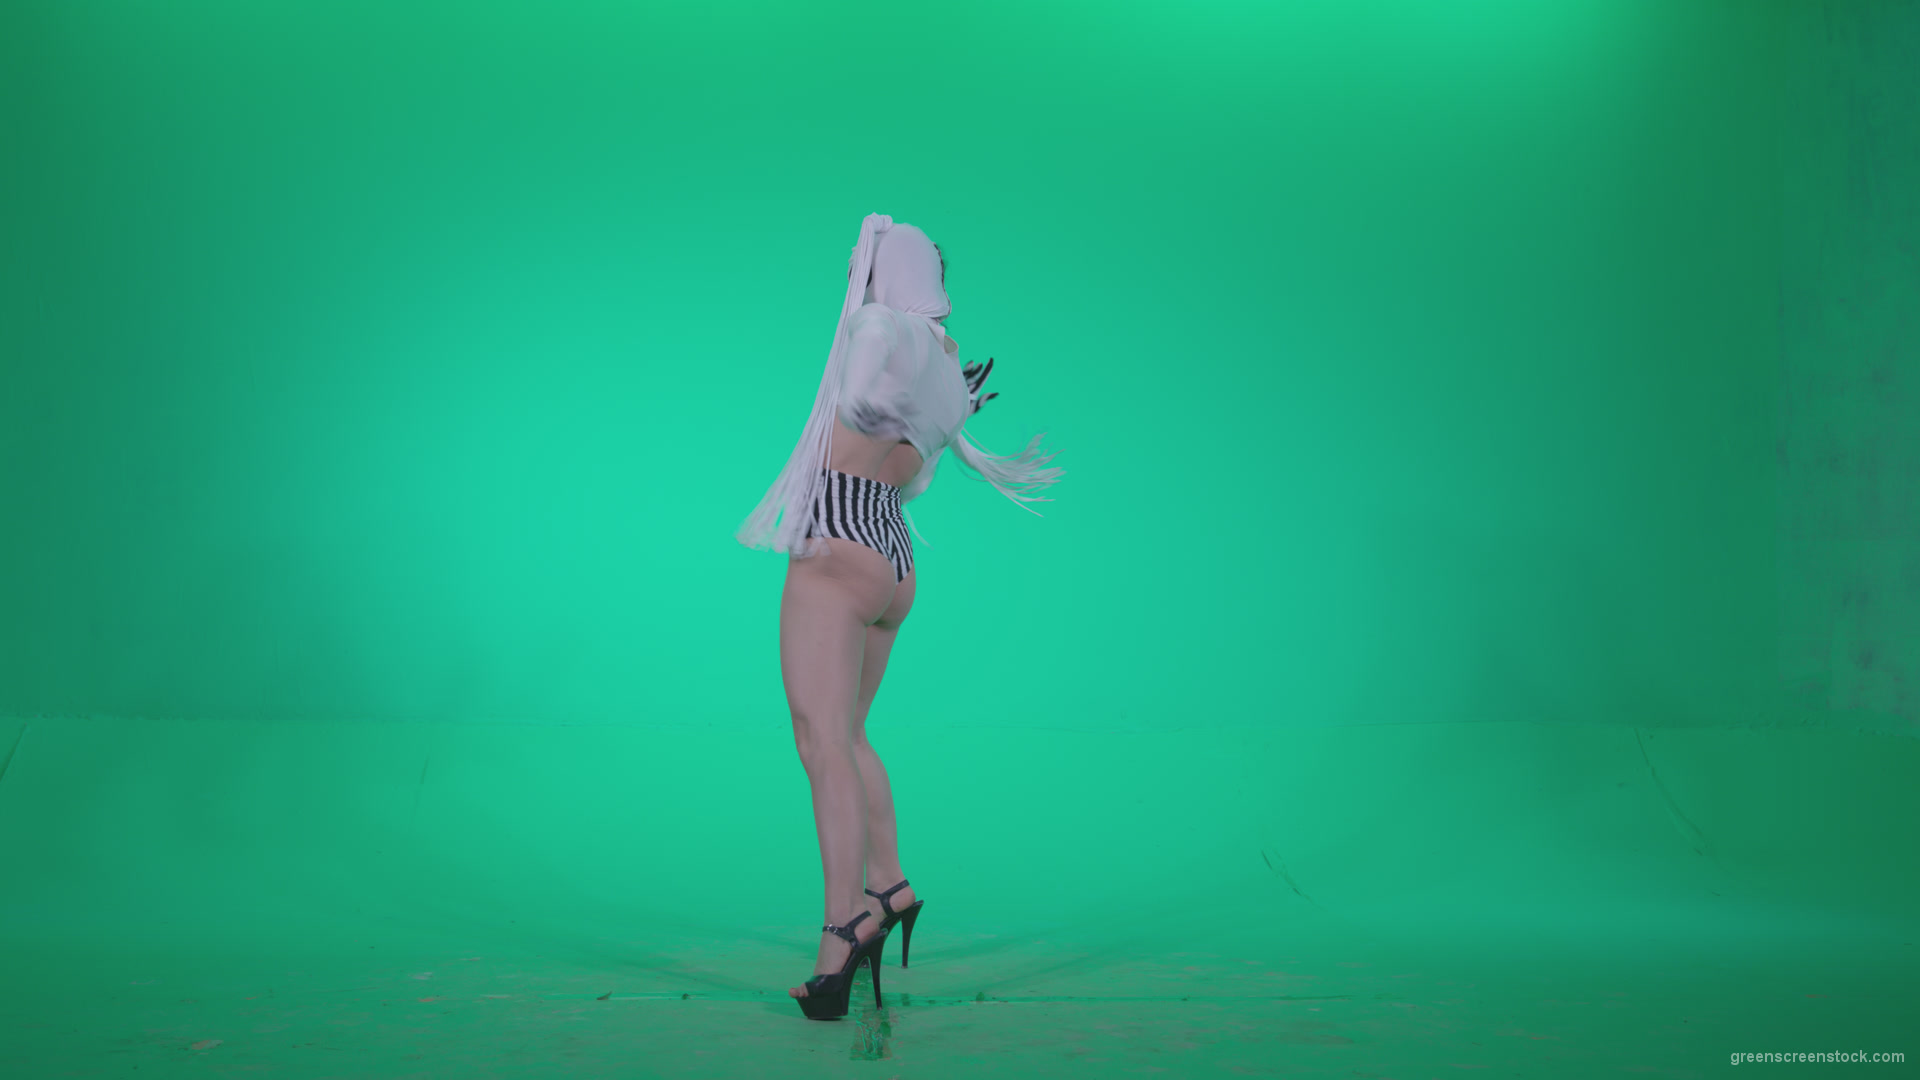 vj video background Go-go-Dancer-with-Latex-Top-t2-Green-Screen-Video-Footage_003